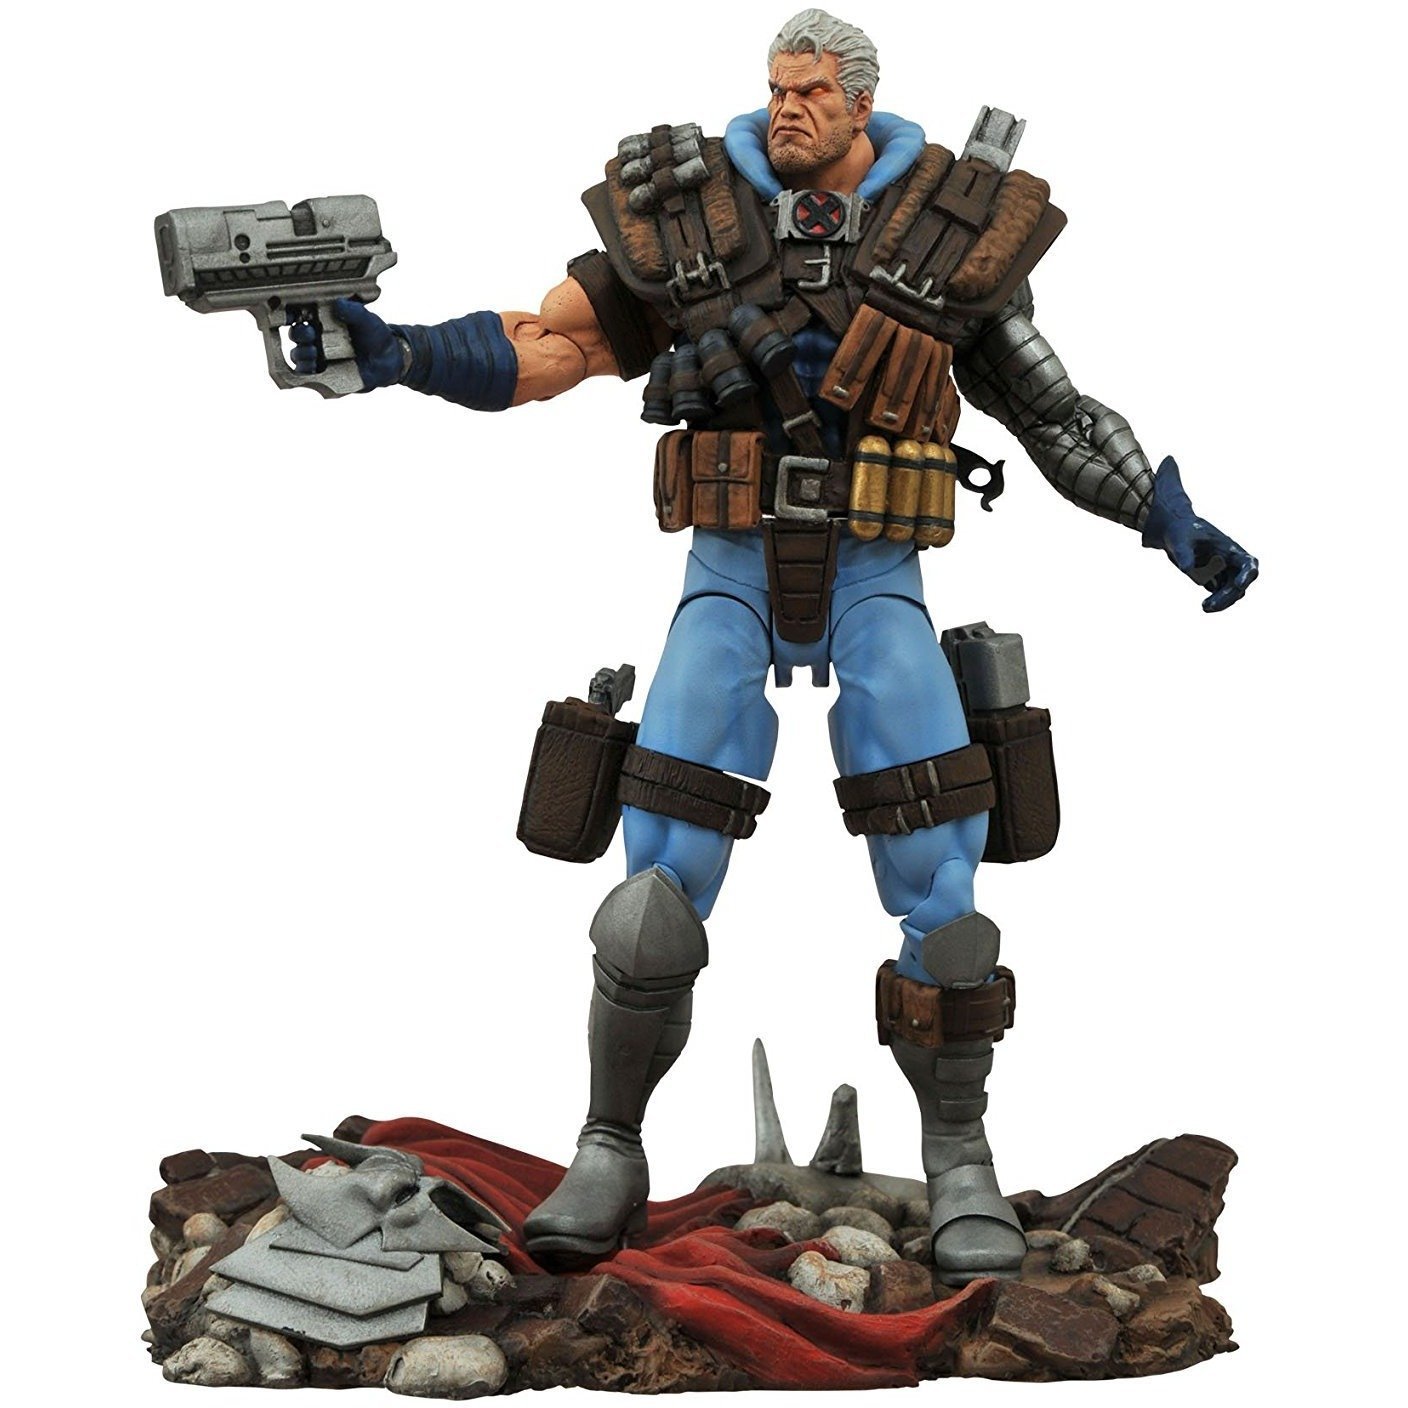 Diamond Select Toys Marvel Select: Cable Action Figure - Nerd Arena